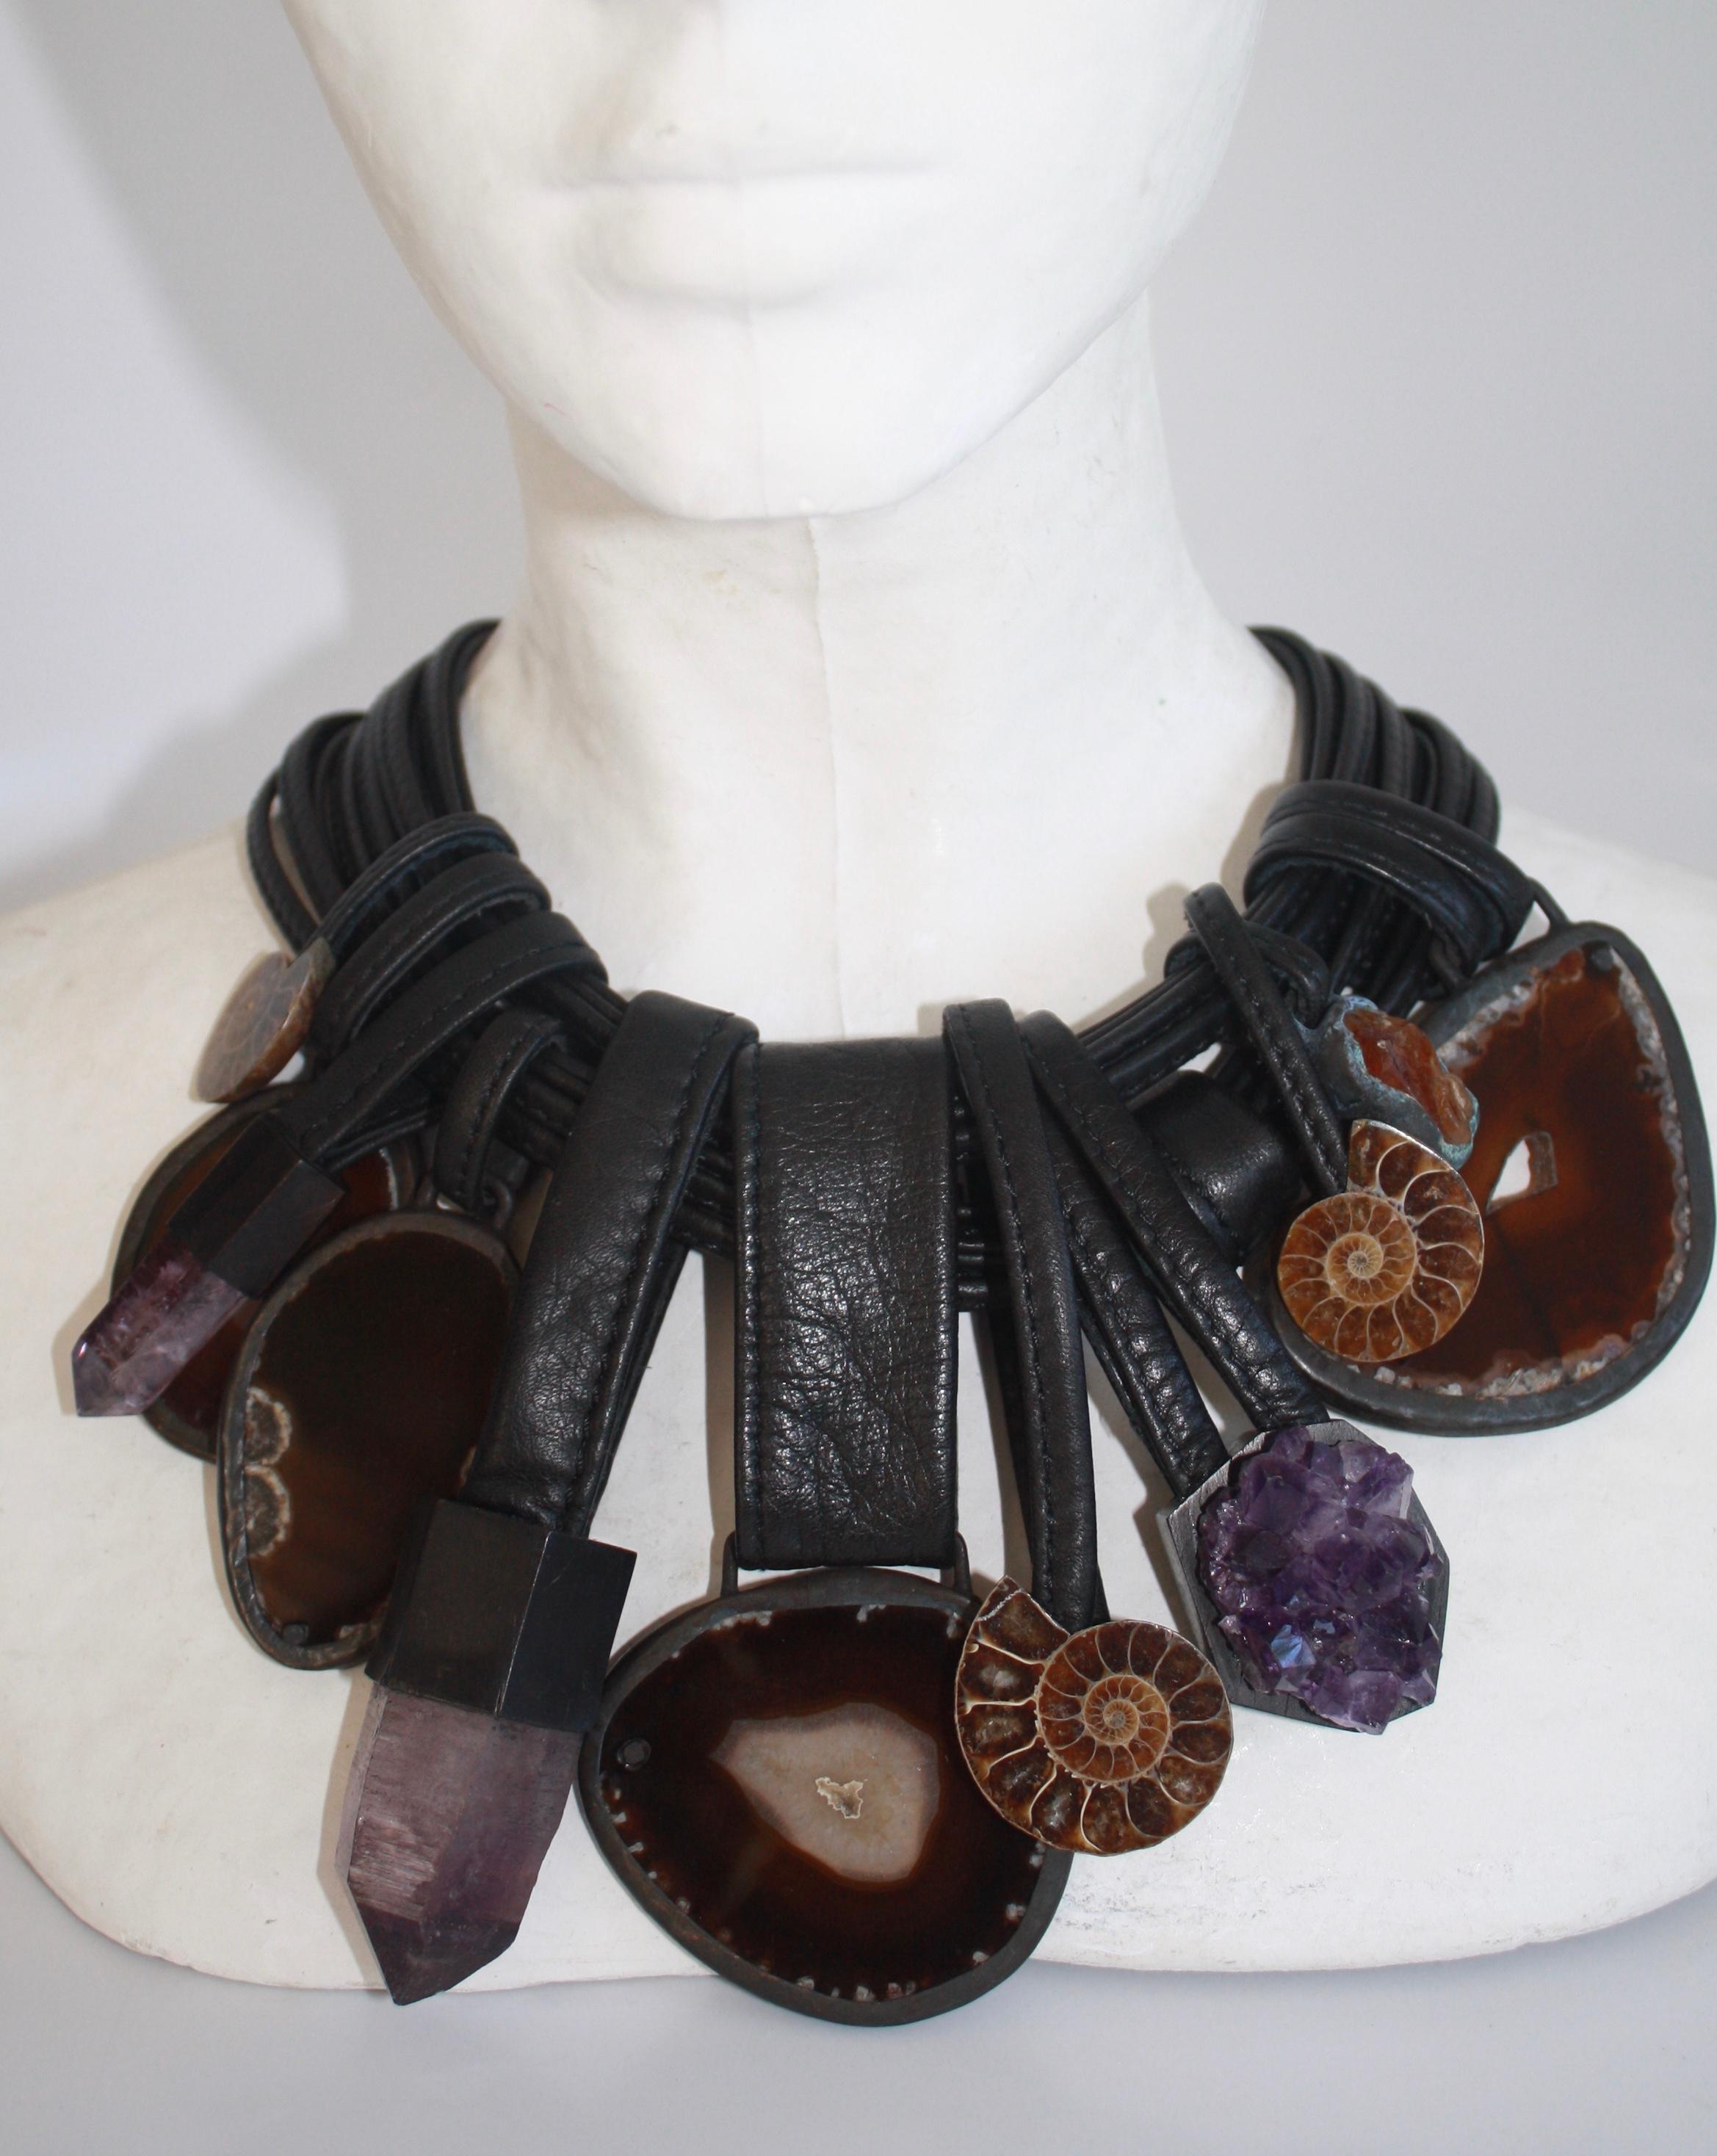 Monies One of a Kind Agate, Amethyst, Ammonite, Leather, & Acacia Wood Necklace. Longest piece is 4”.